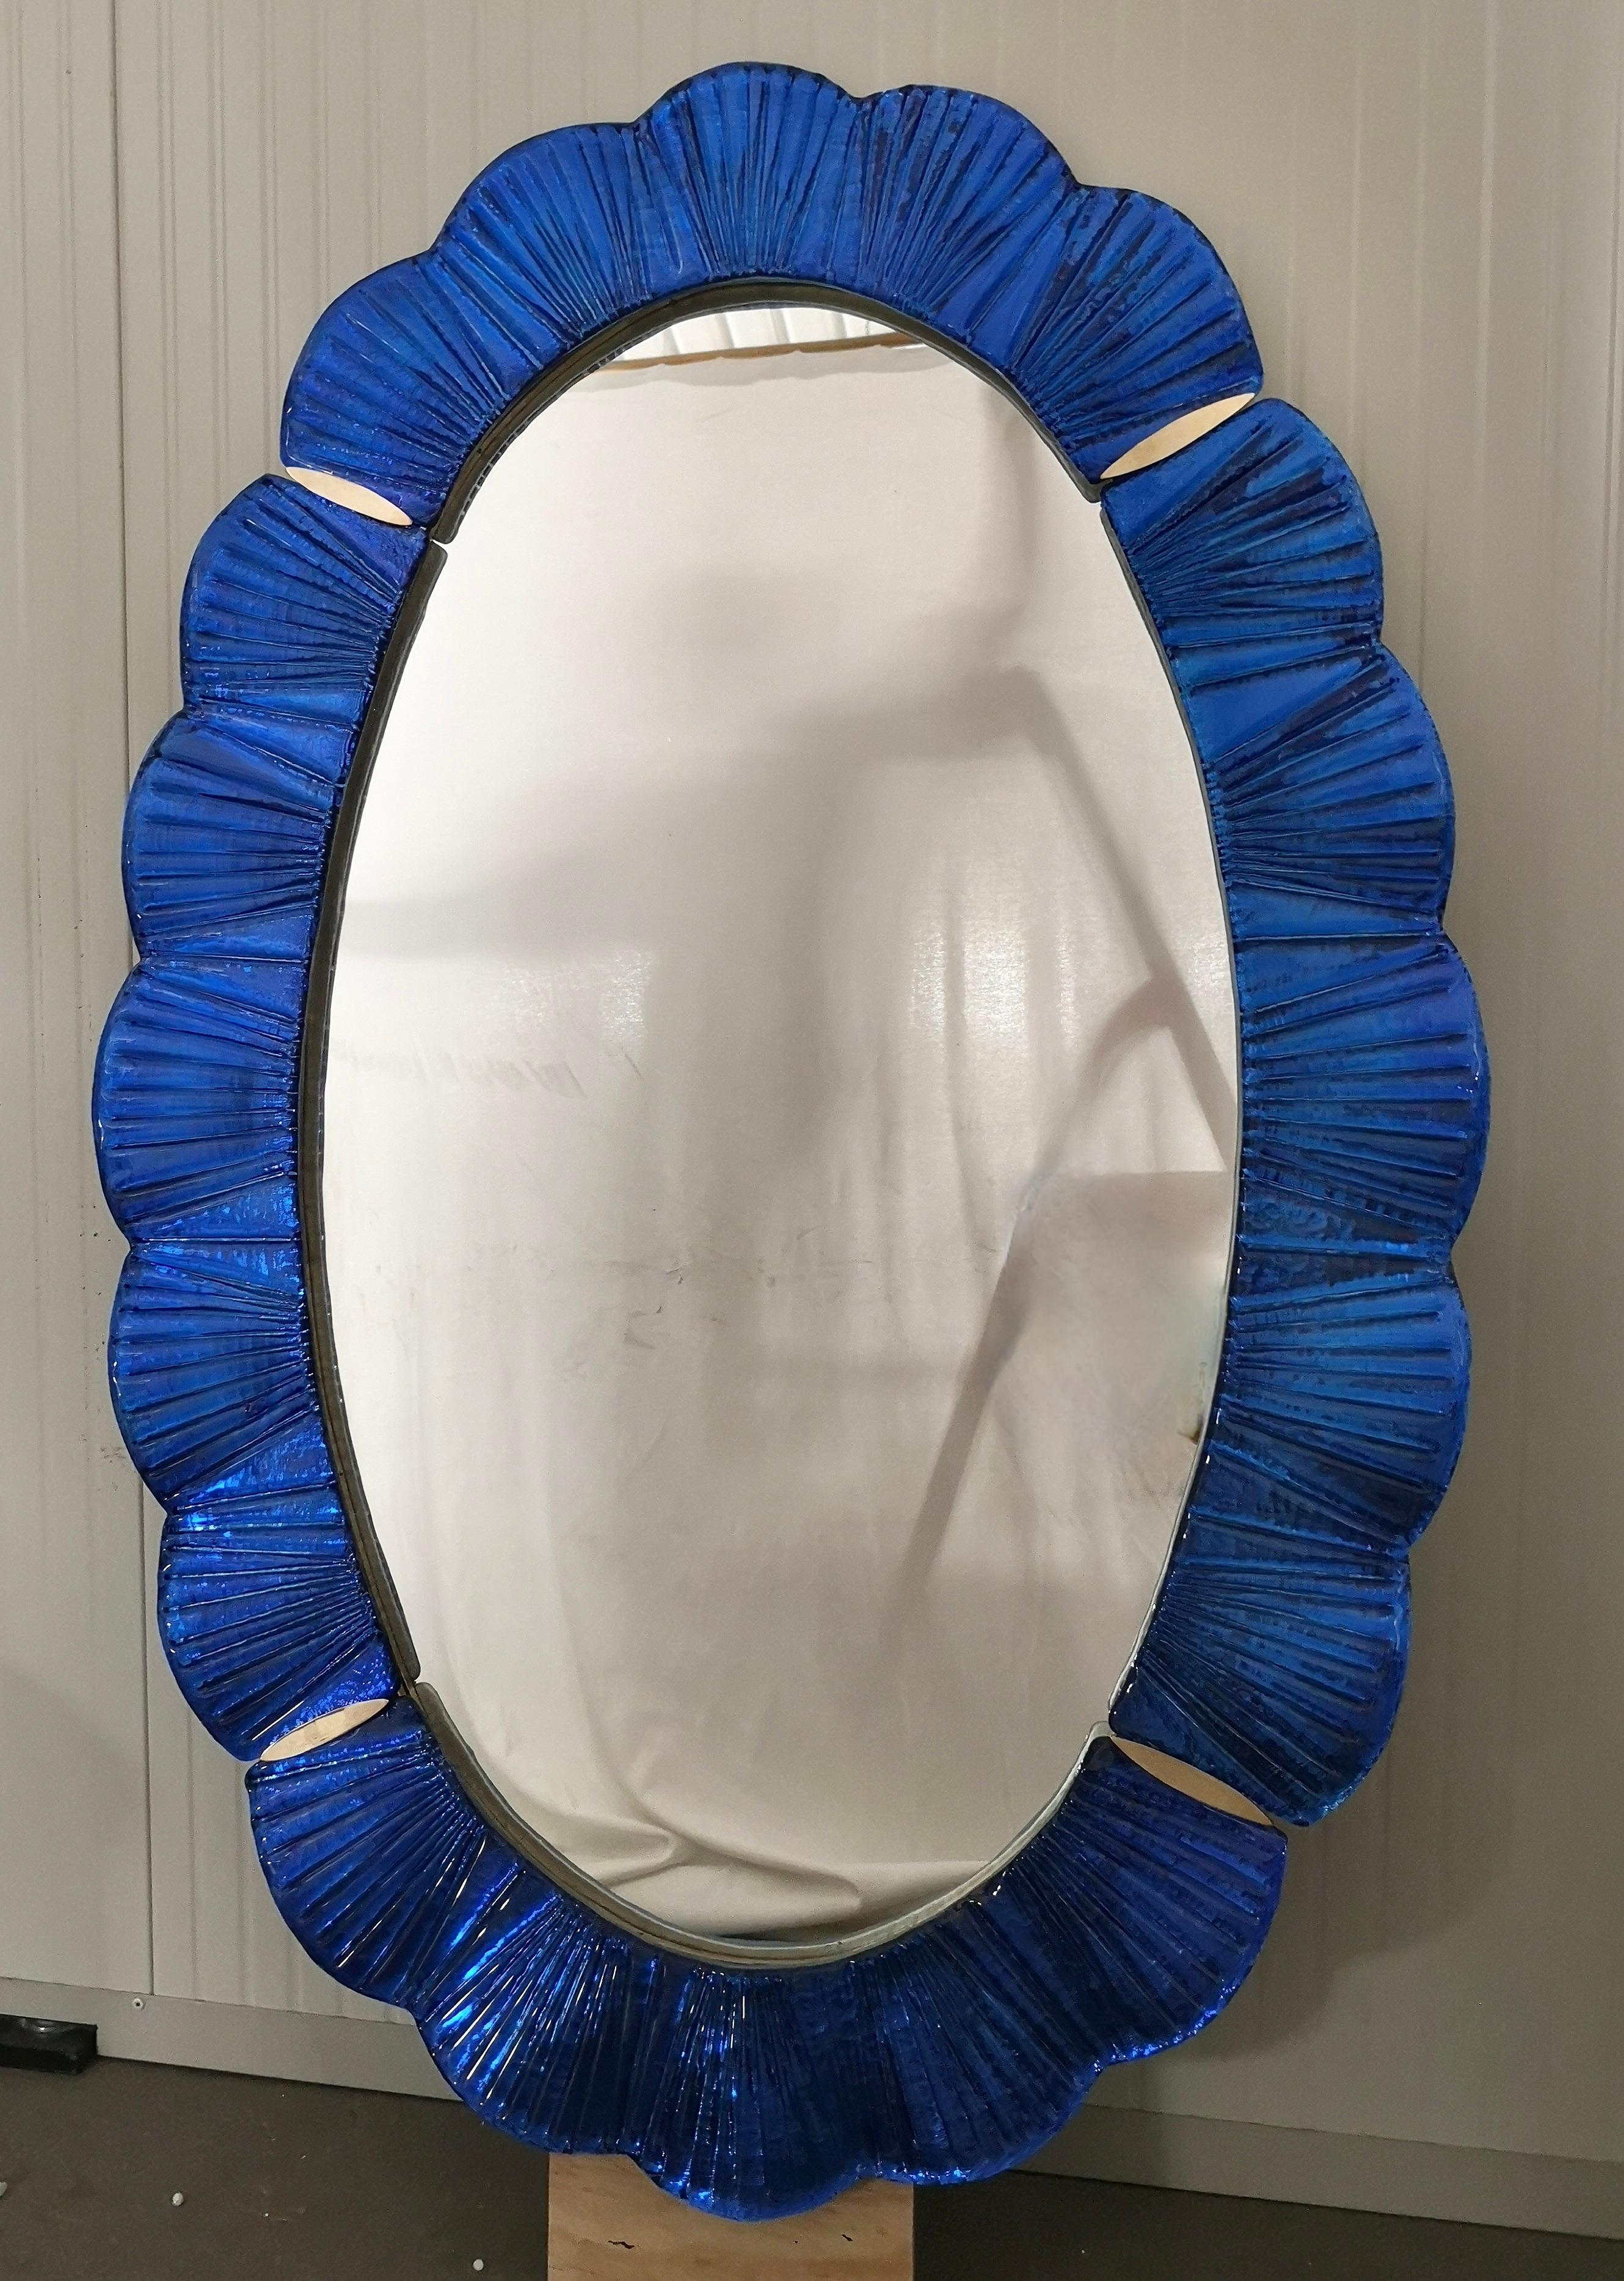 Stunning mirror in blazing blu color Murano glass, Venice. A mirror that alone will furnish your home environment.

The mirror has a rear structure in wood, on which four Murano glass sections are mounted to form an oval as in the photograph. The